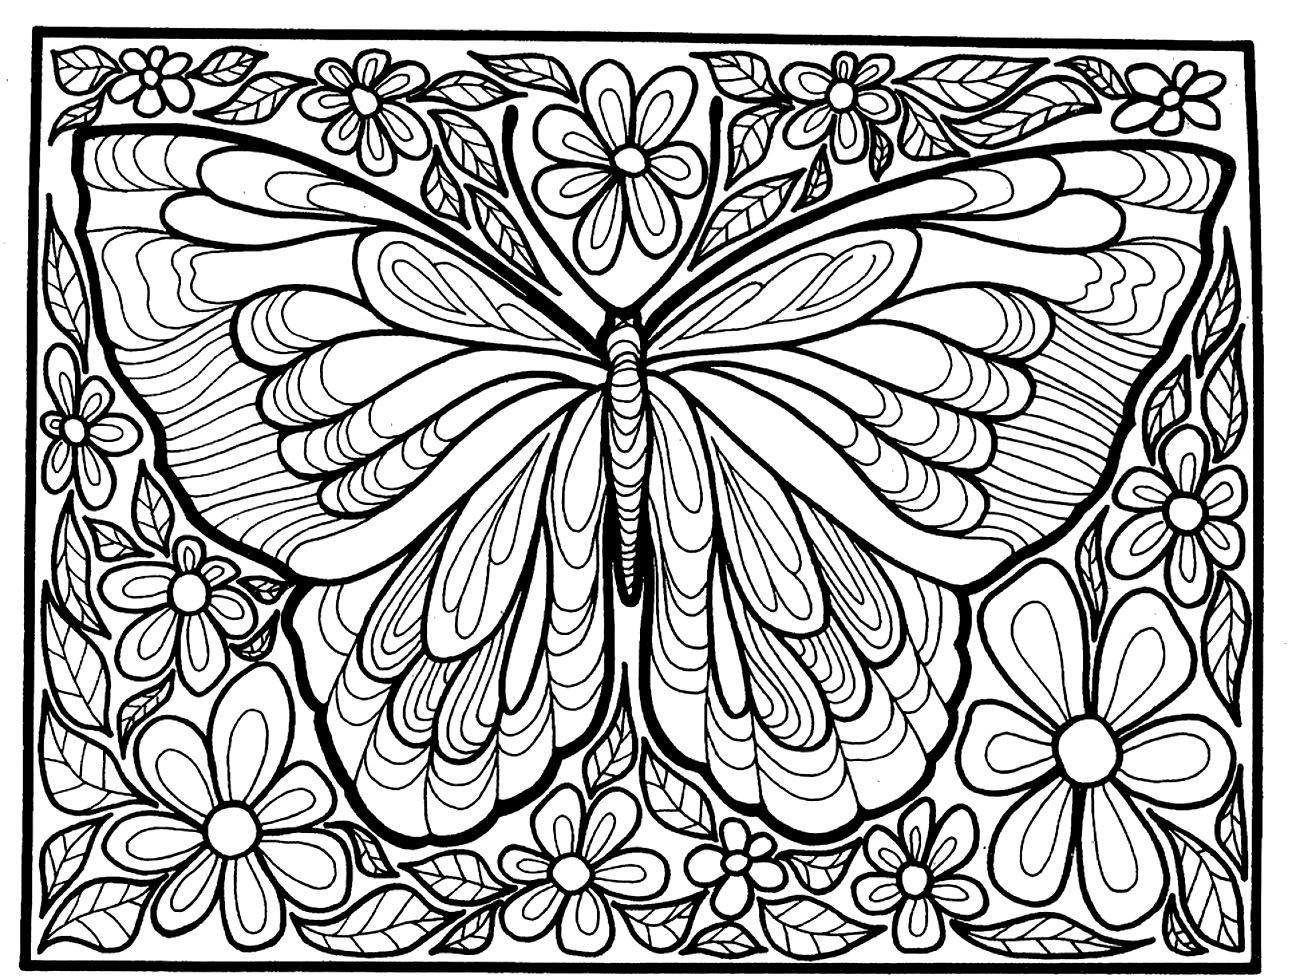 Insect Coloring Pages For Girls
 Insect Coloring Pages Best Coloring Pages For Kids